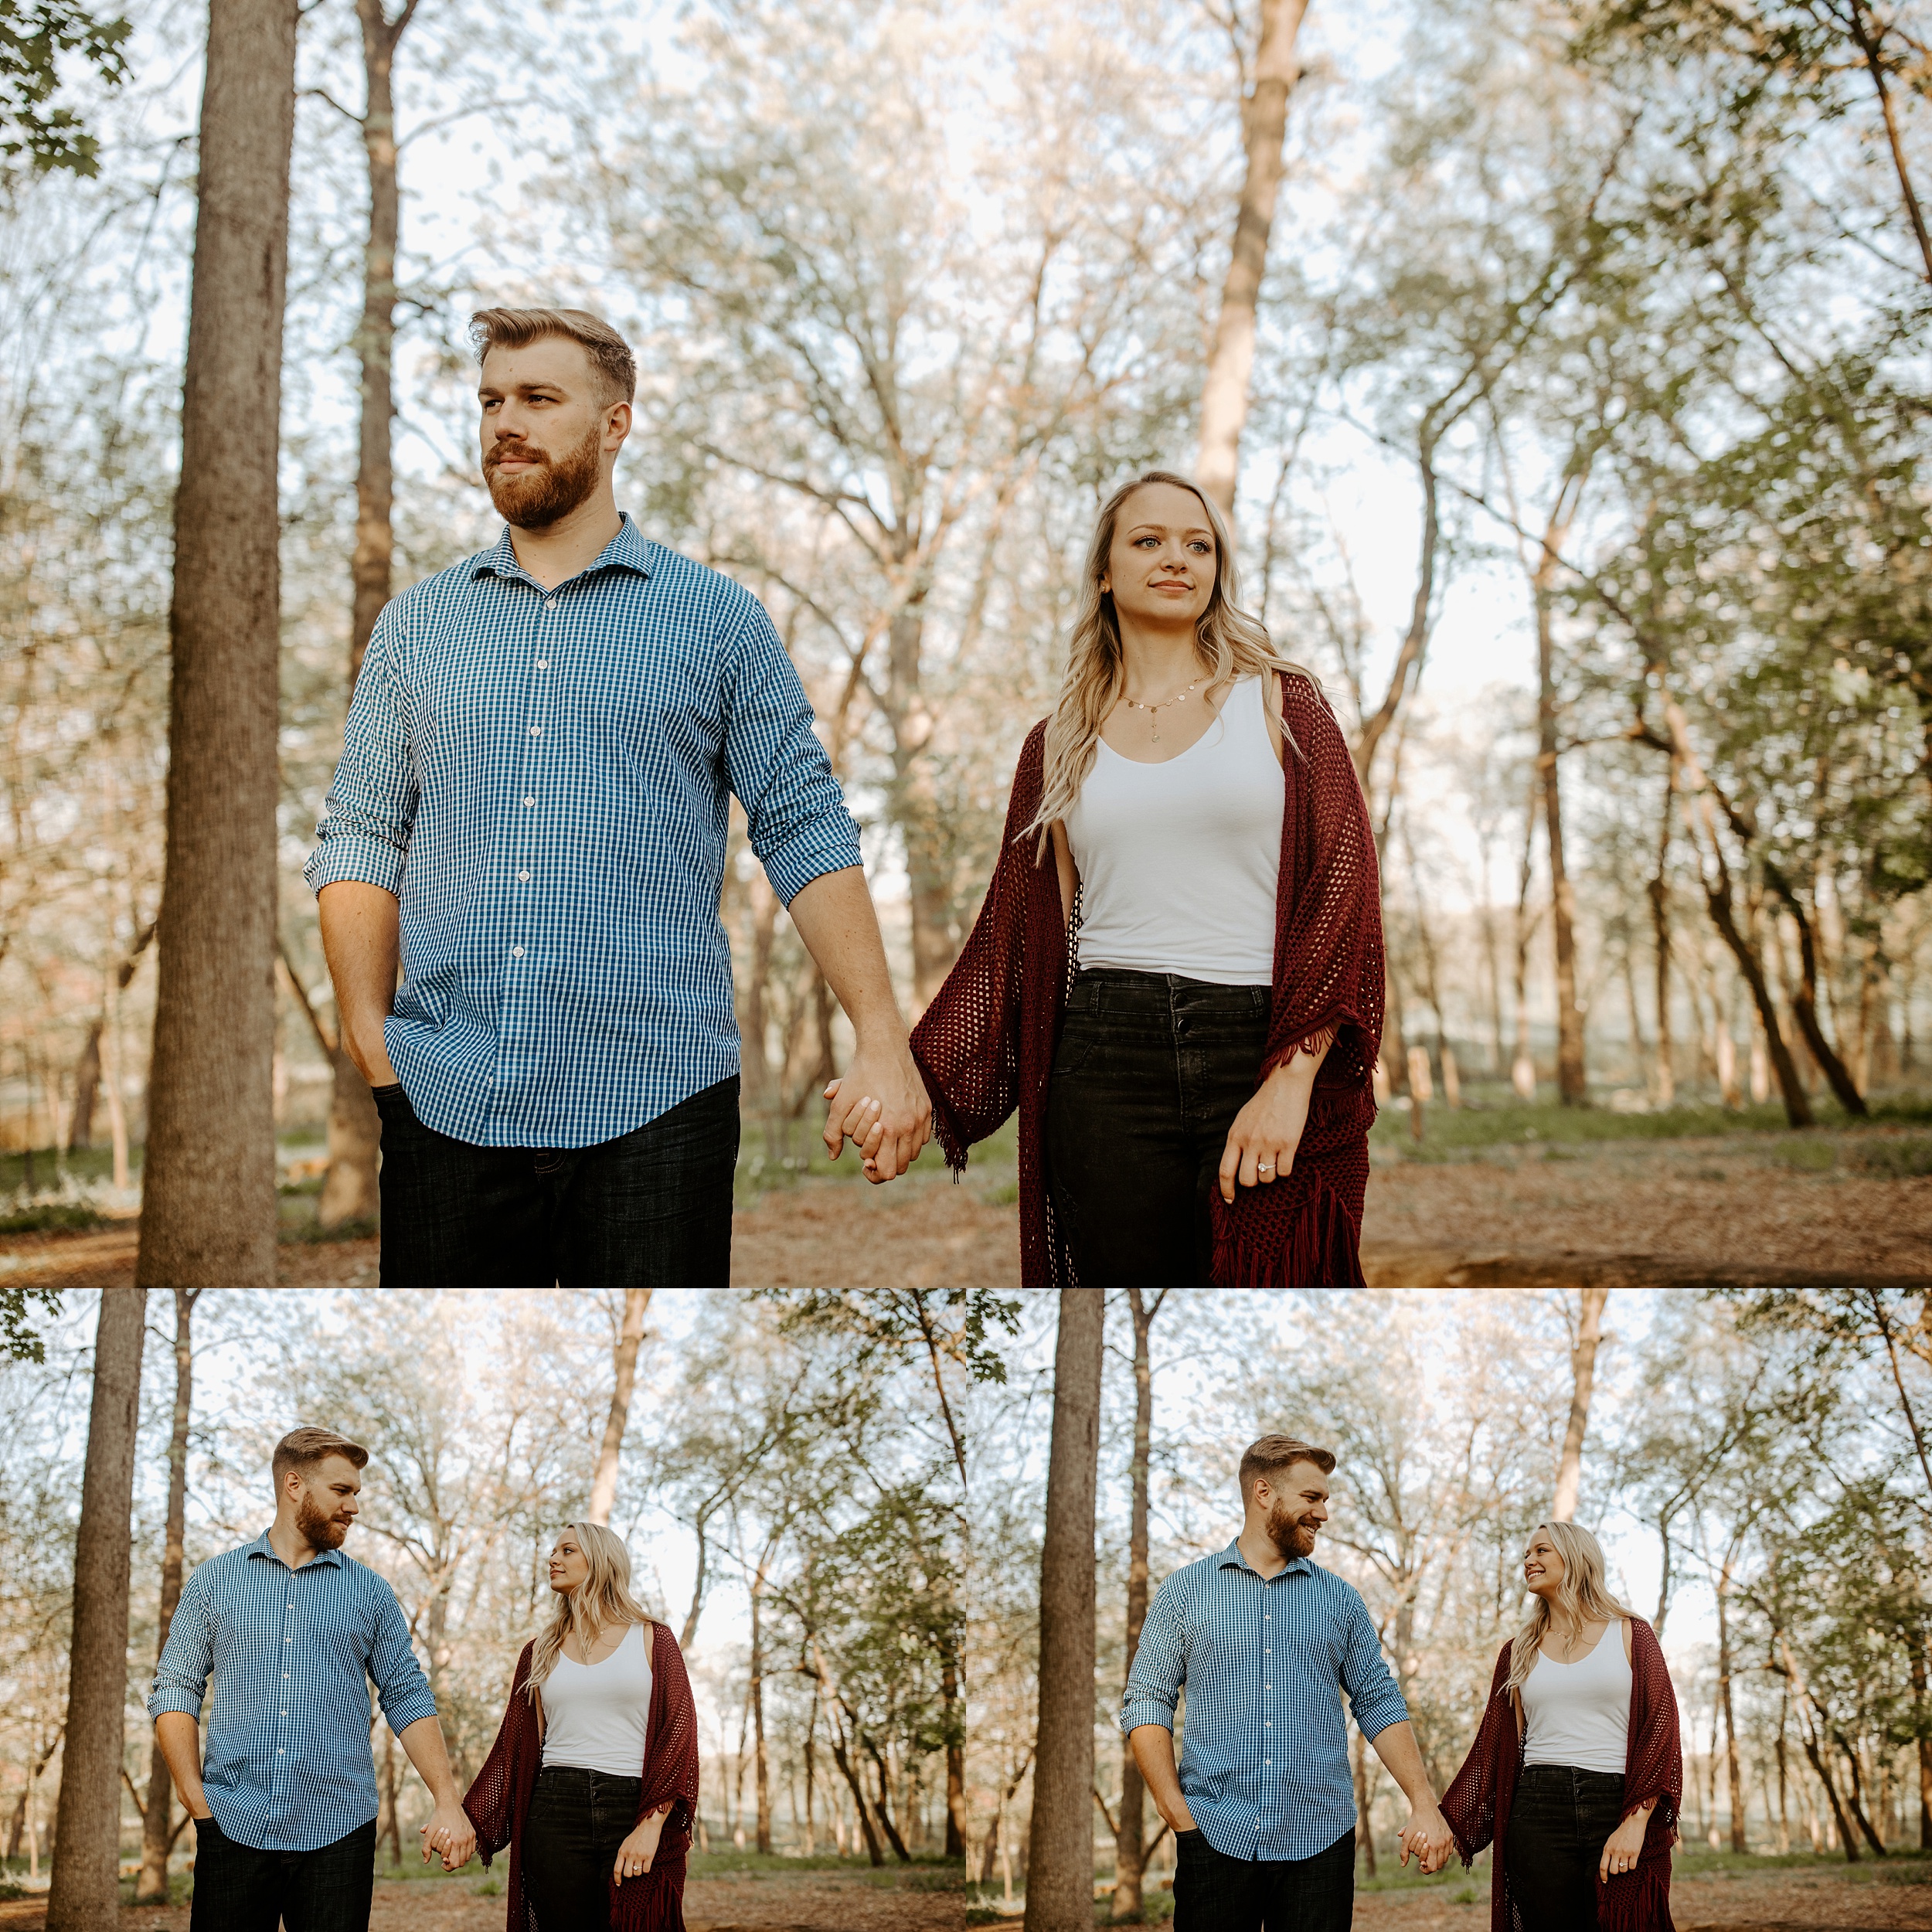 Sunset engagement session with a couple of cuties at Cantigny Park in Wheaton, IL